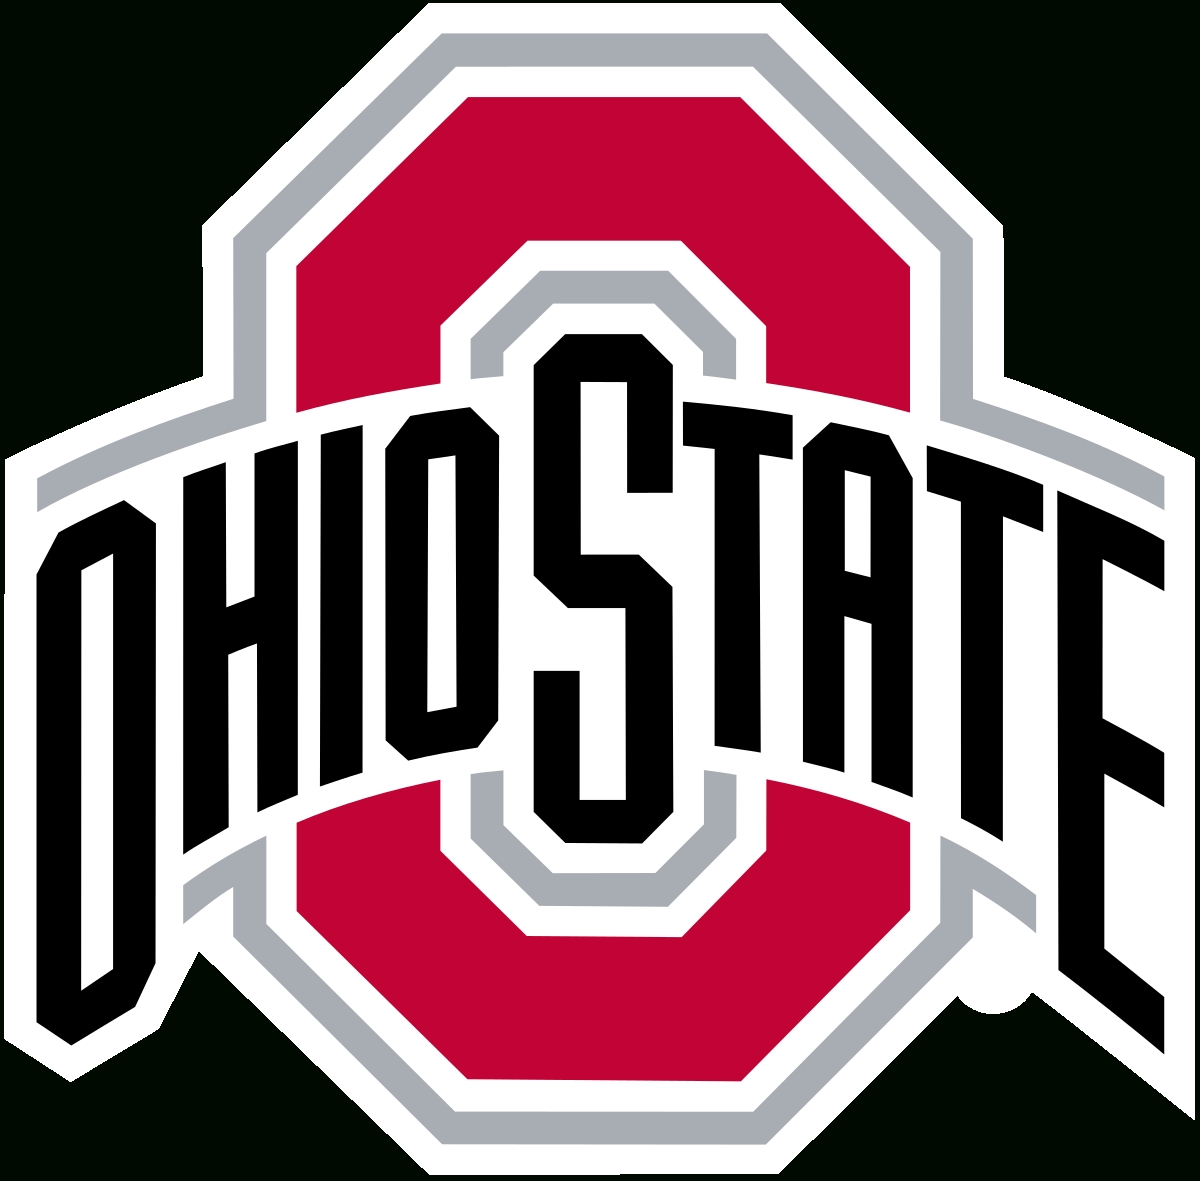 10 New Ohio State Buckeyes Image FULL HD 1920×1080 For PC Background